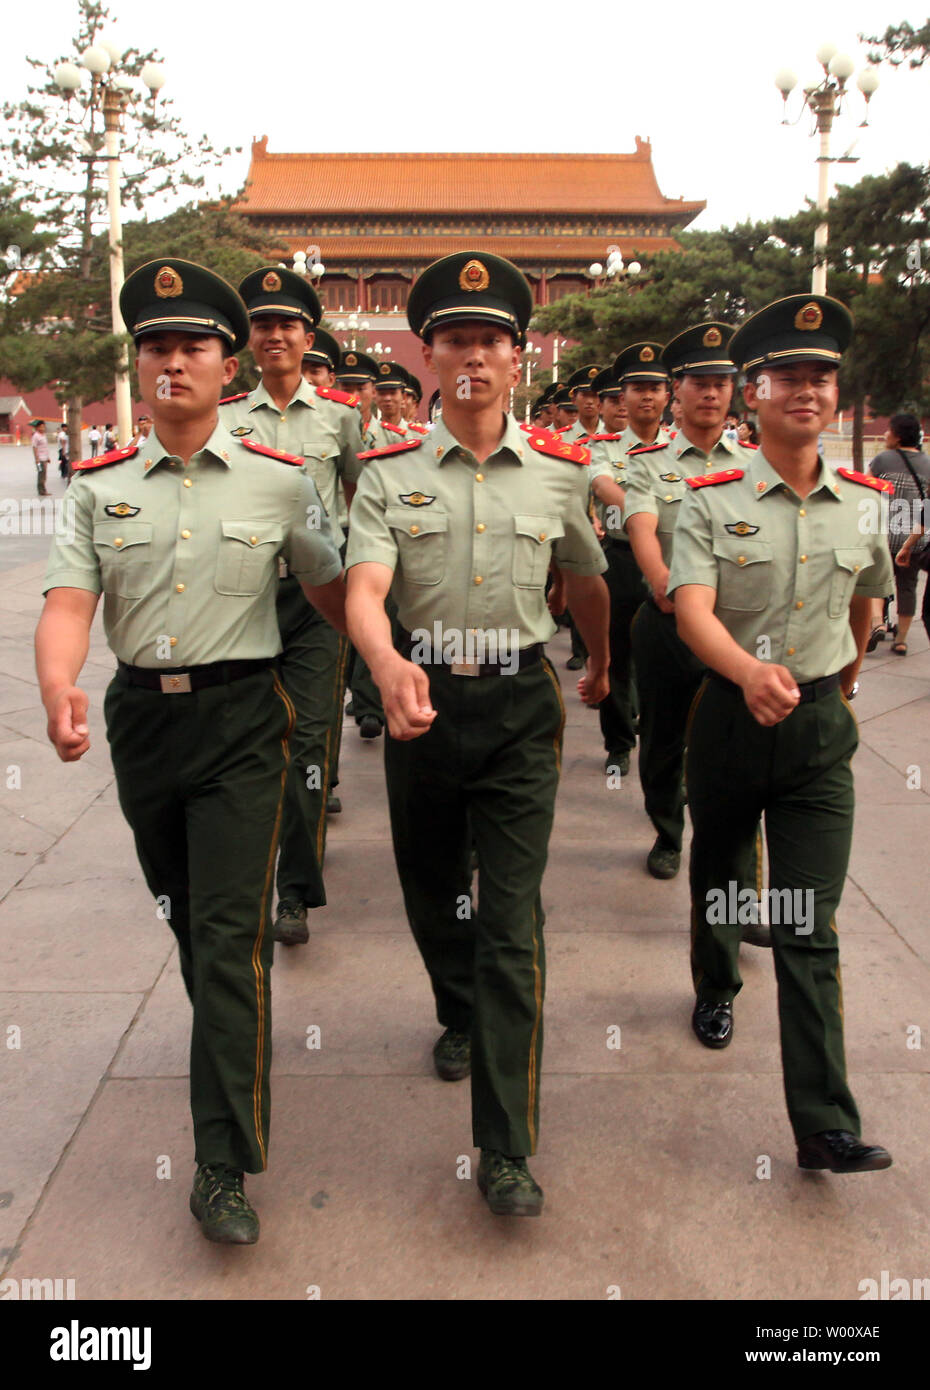 Chinese People's Liberation Army soldiers march to their barracks near Tiananmen Square in central Beijing on June 3, 2011.  China's capital is under heavy security in the lead up to the June 4 anniversary of the 1989 government crackdown on pro-democracy protests, which killed thousands of unarmed students.      UPI/Stephen Shaver Stock Photo